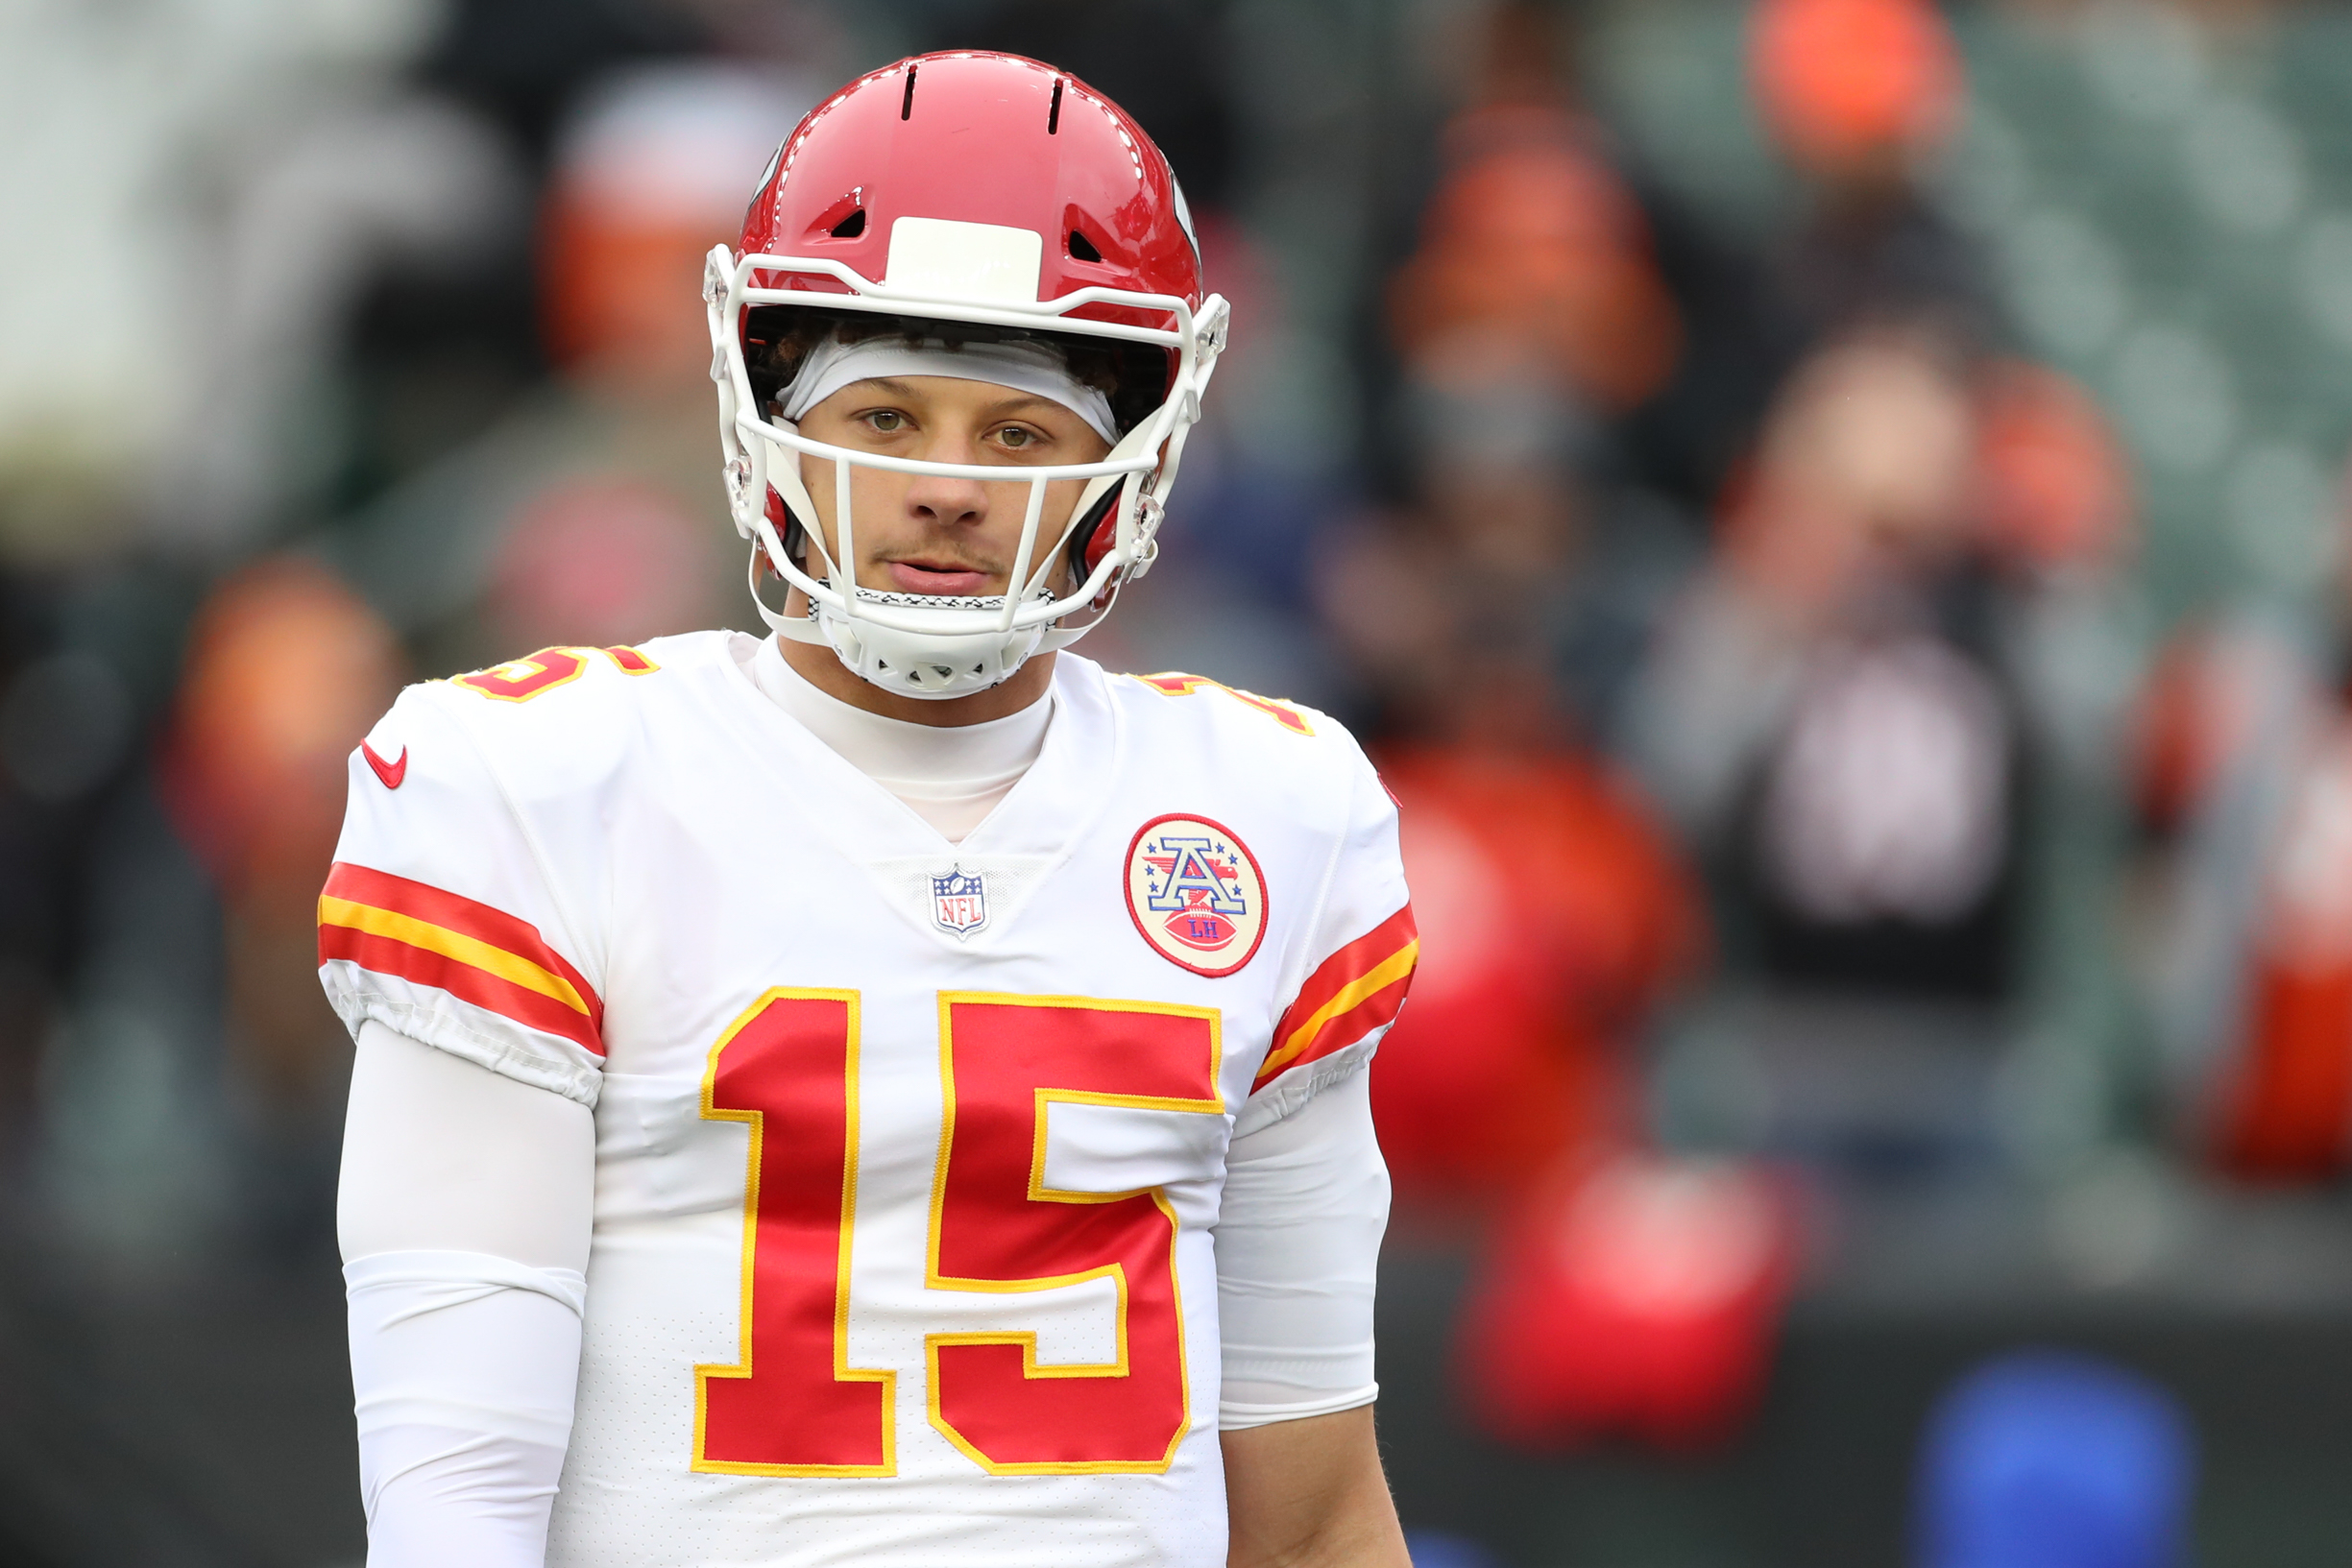 Chiefs quarterback Patrick Mahomes looks on during a game